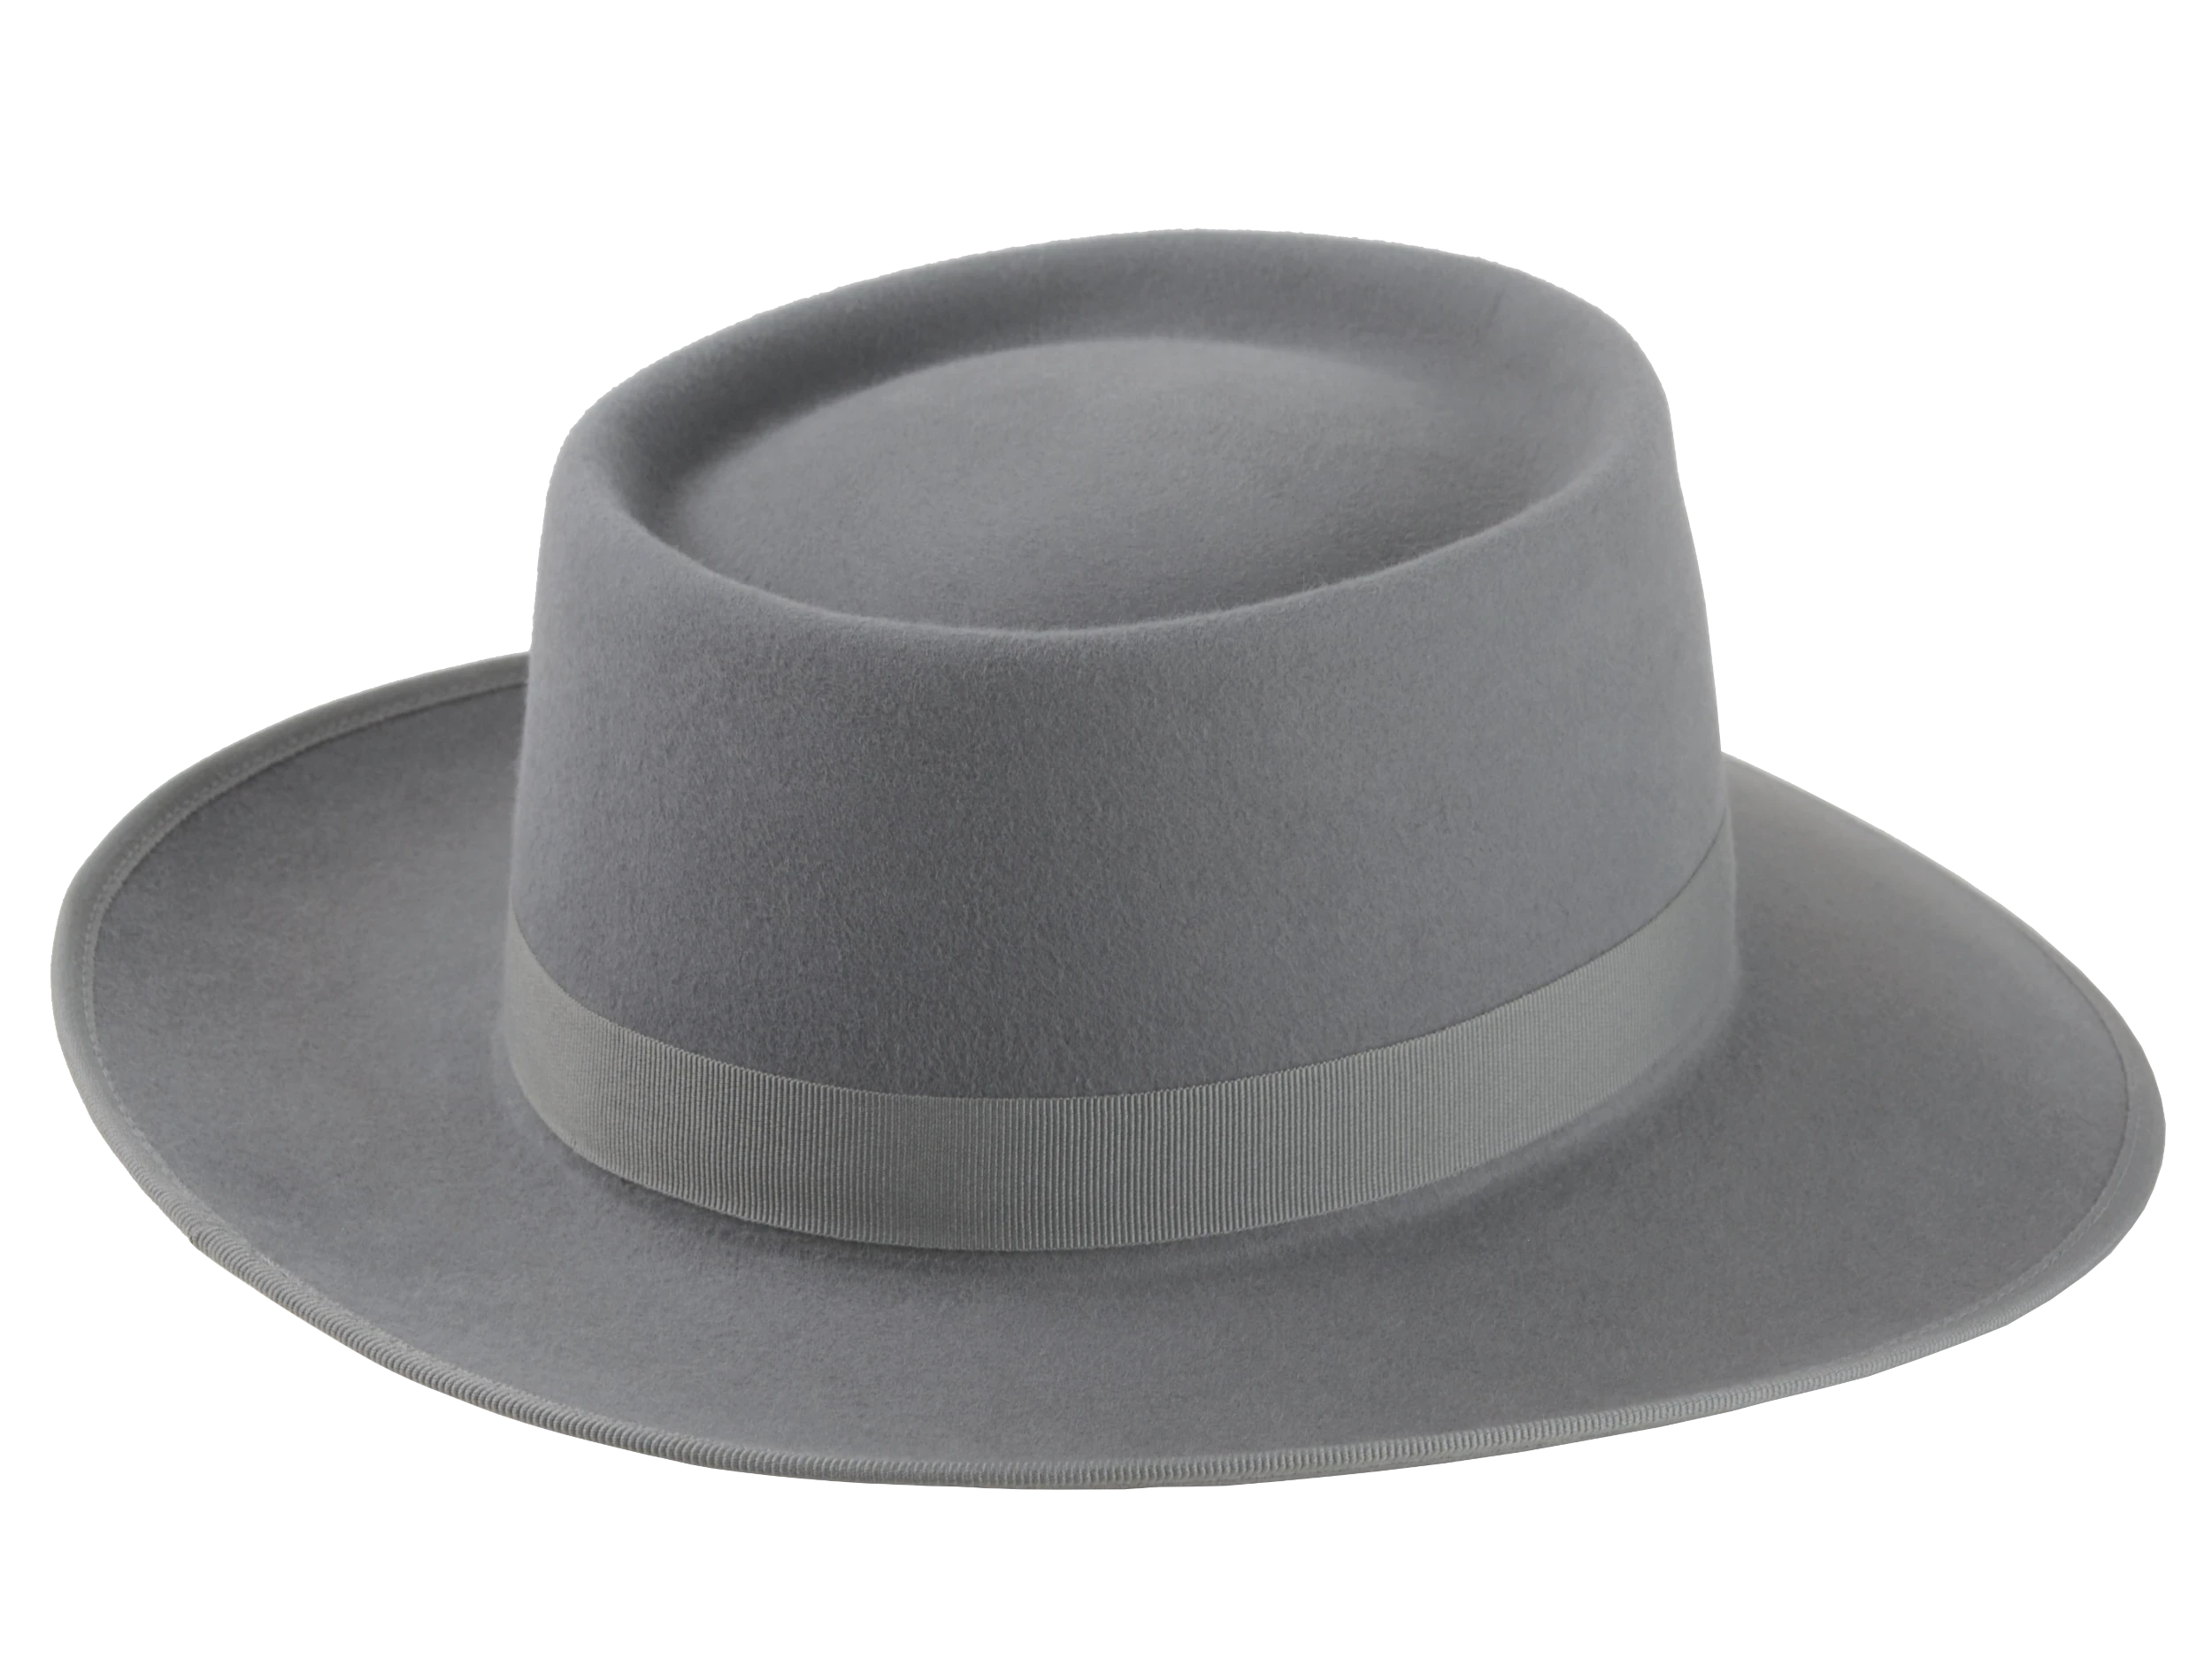 Oppenheimer hat positioned to highlight the smooth surface finish | Agnoulita Hats